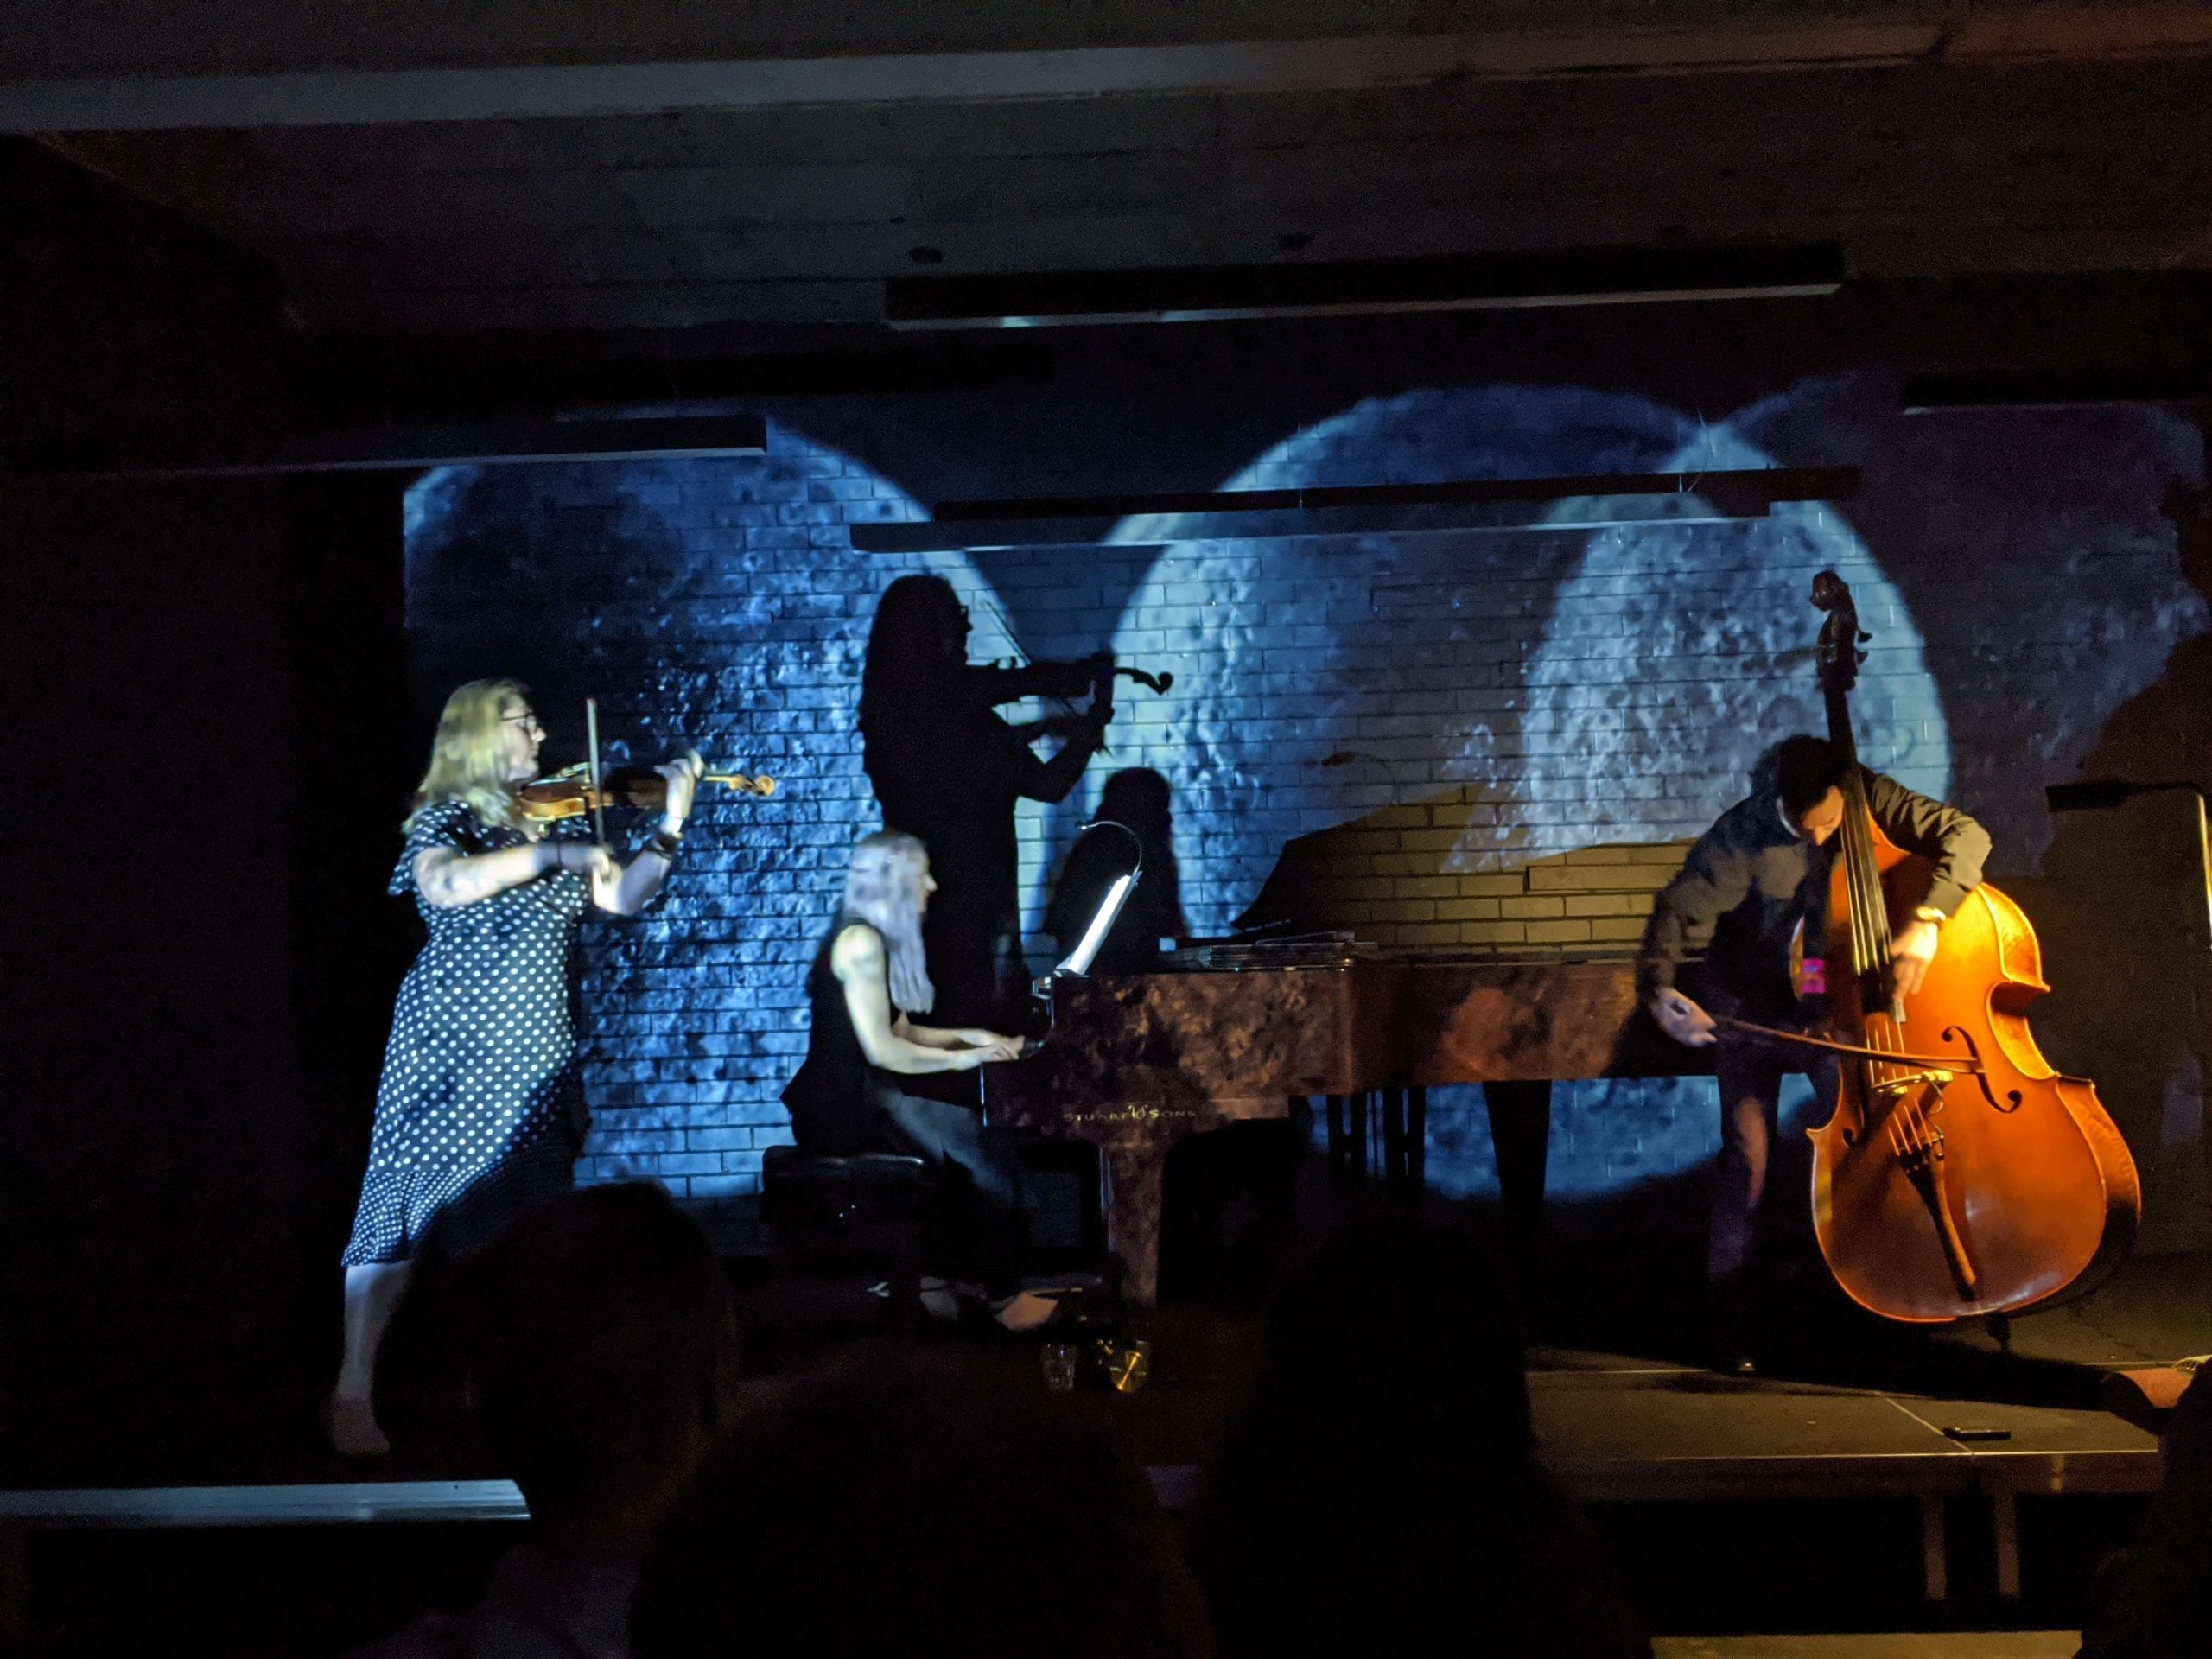 Collaboration with 6 different instrumentalists based in Melbourne, Australia performing Ania's compositions written between years 2016 and 2019